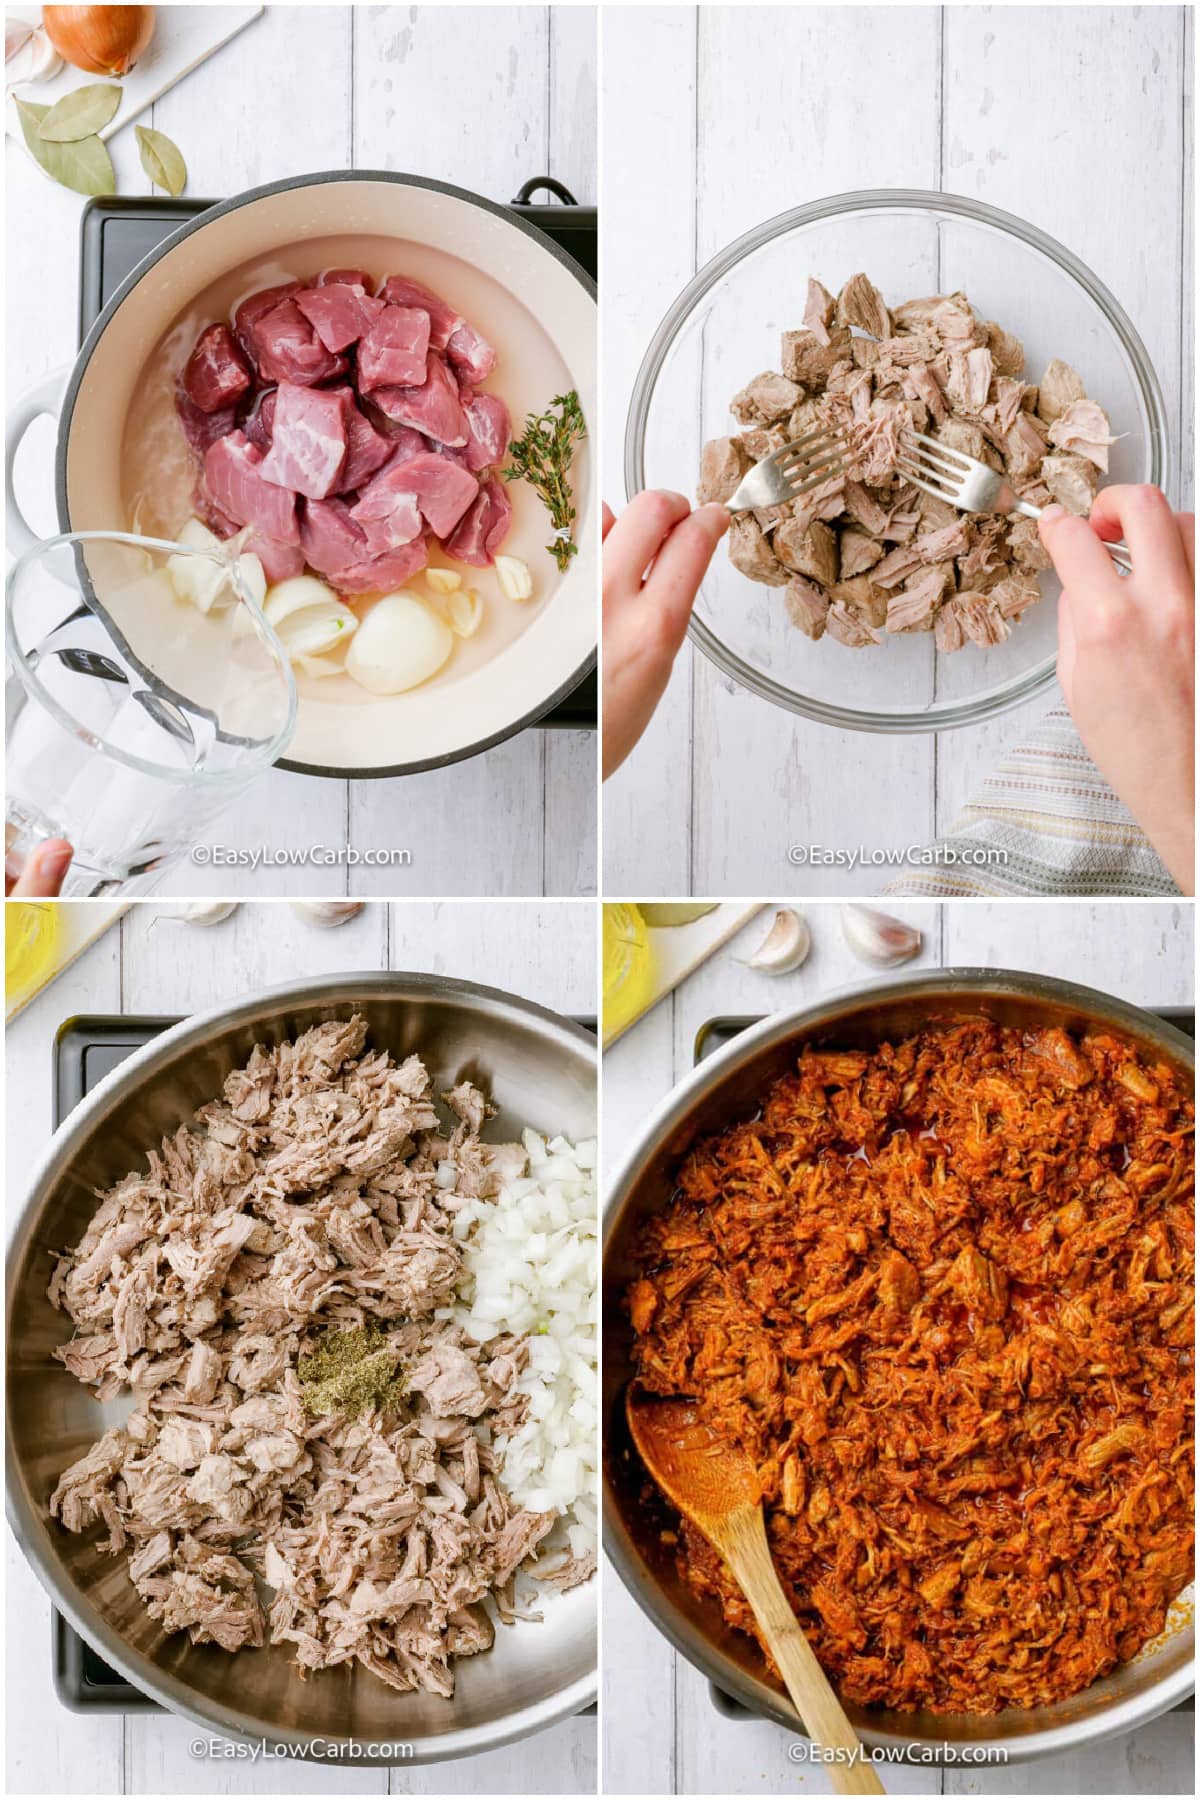 process to cook and shred the pork, then make the shredded pork tacos filling